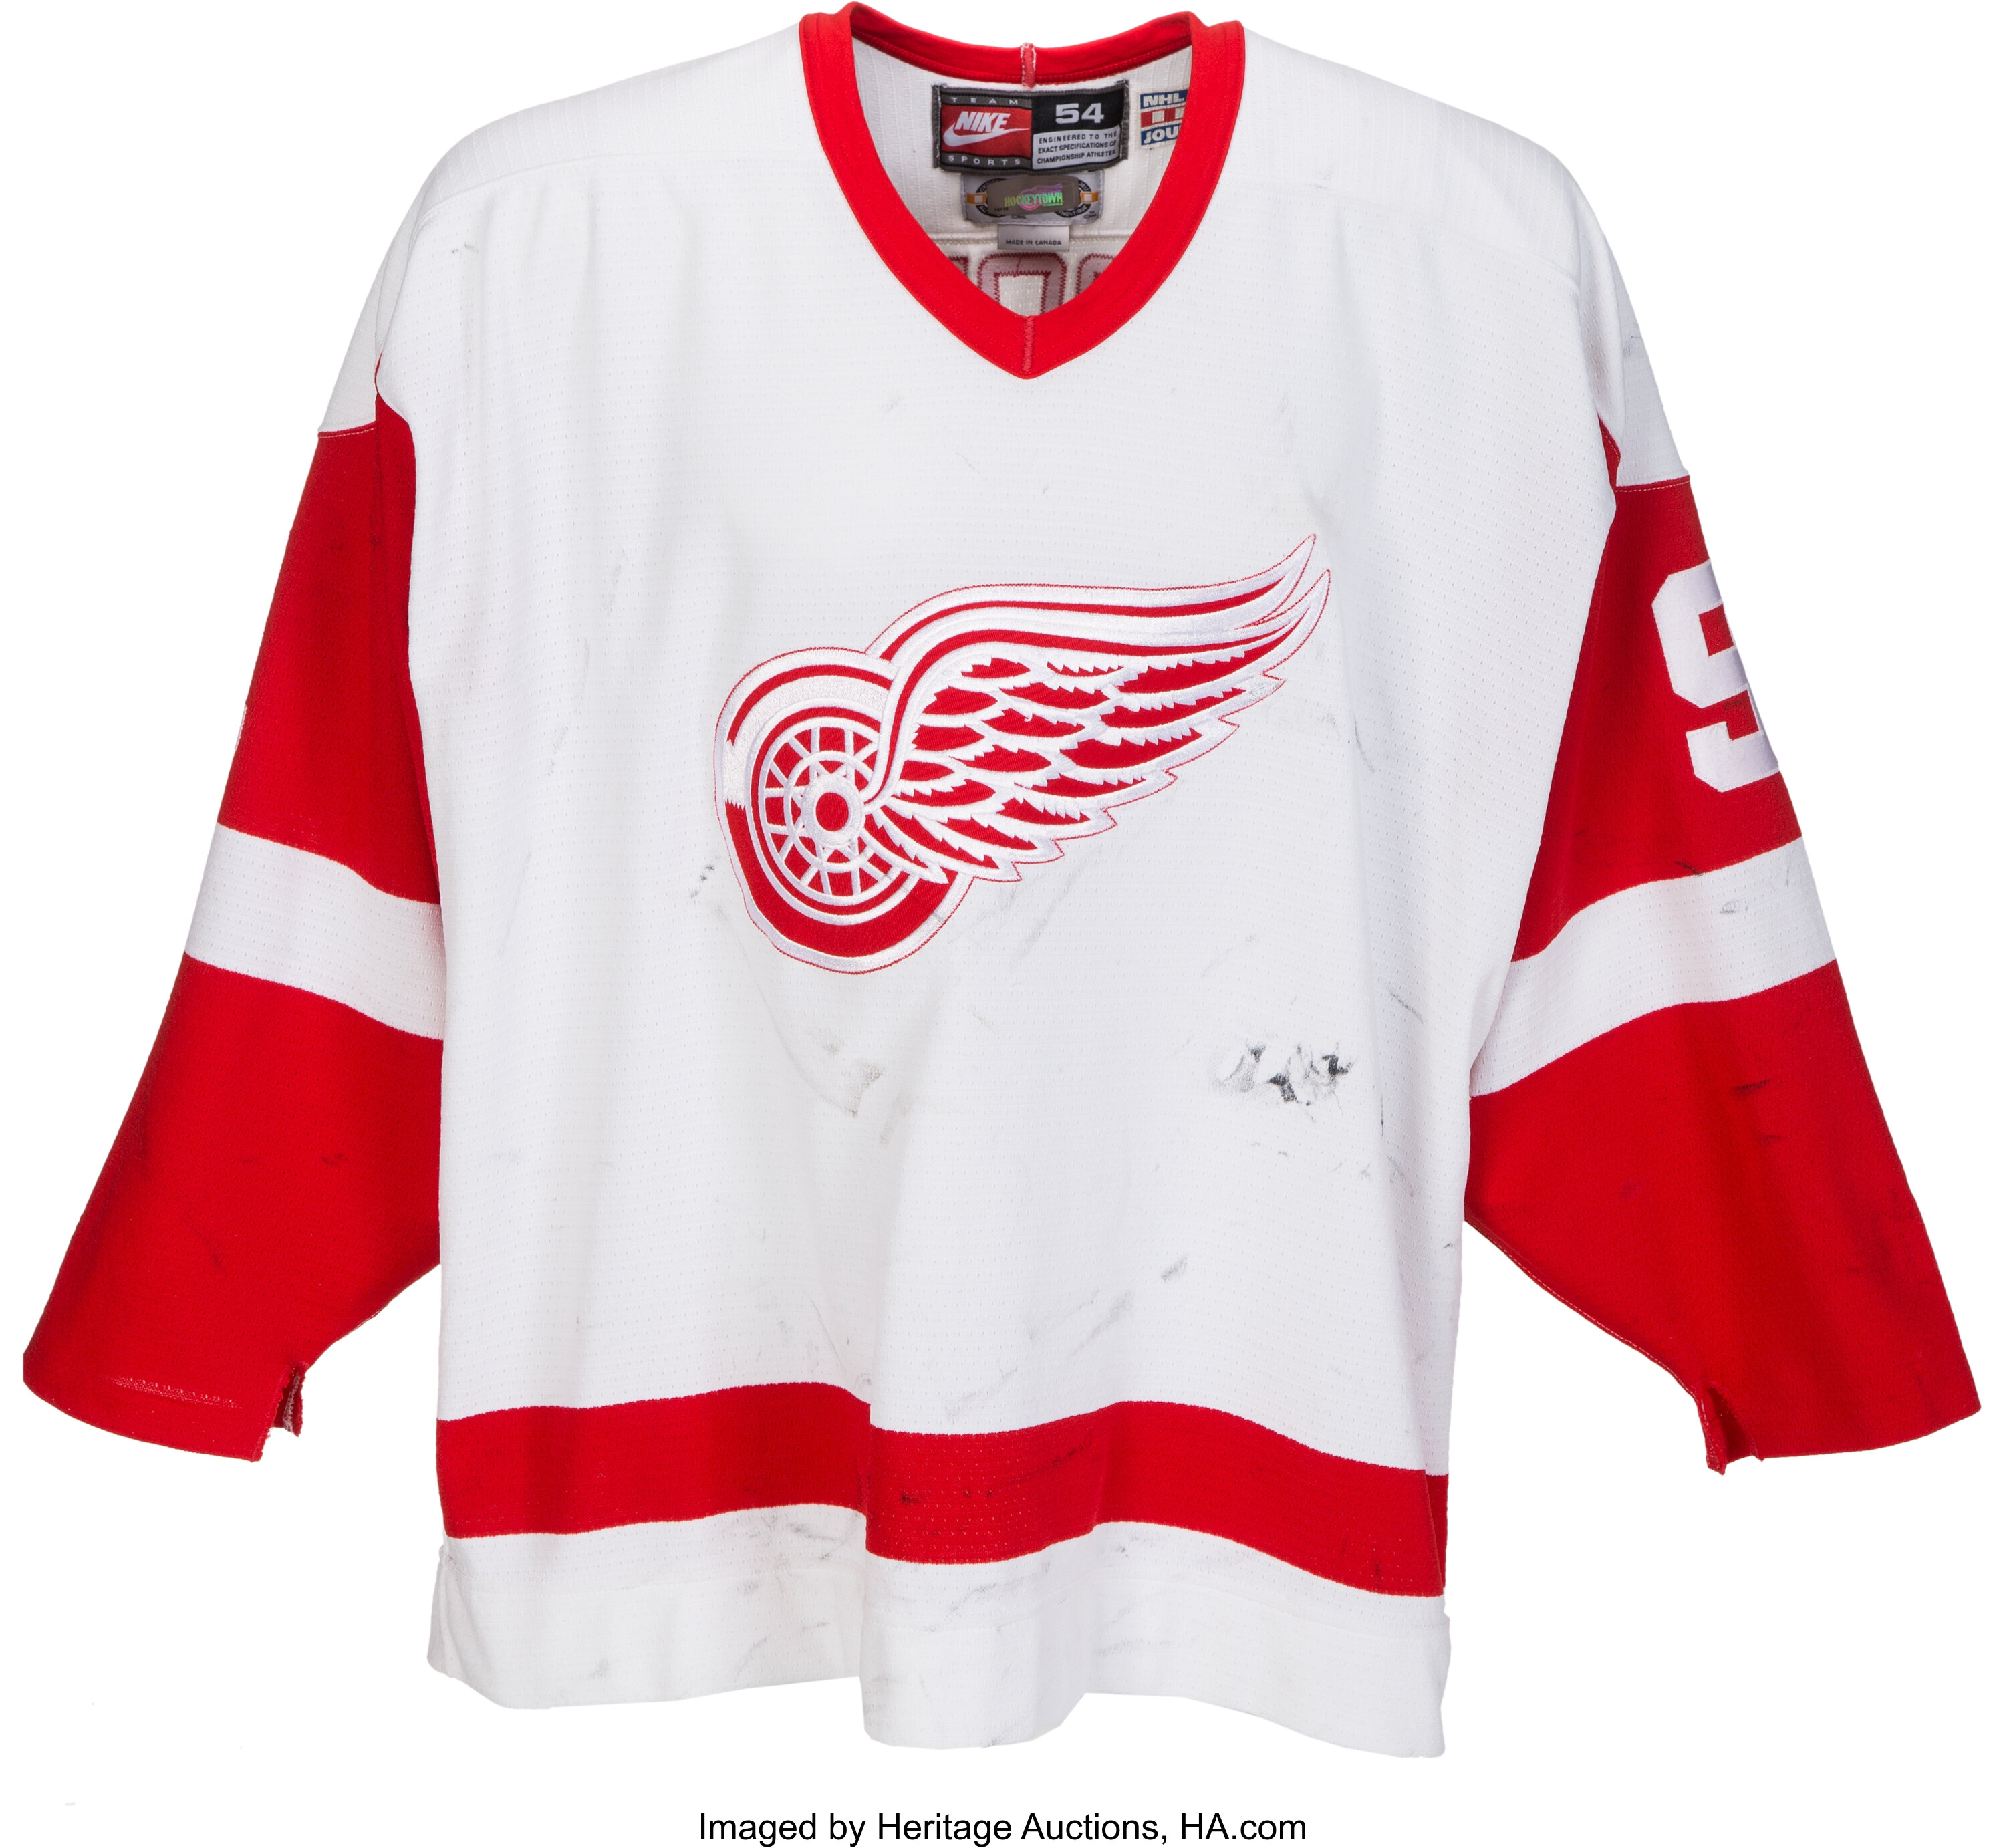 Bought myself one of my Holy Grail jerseys : r/DetroitRedWings